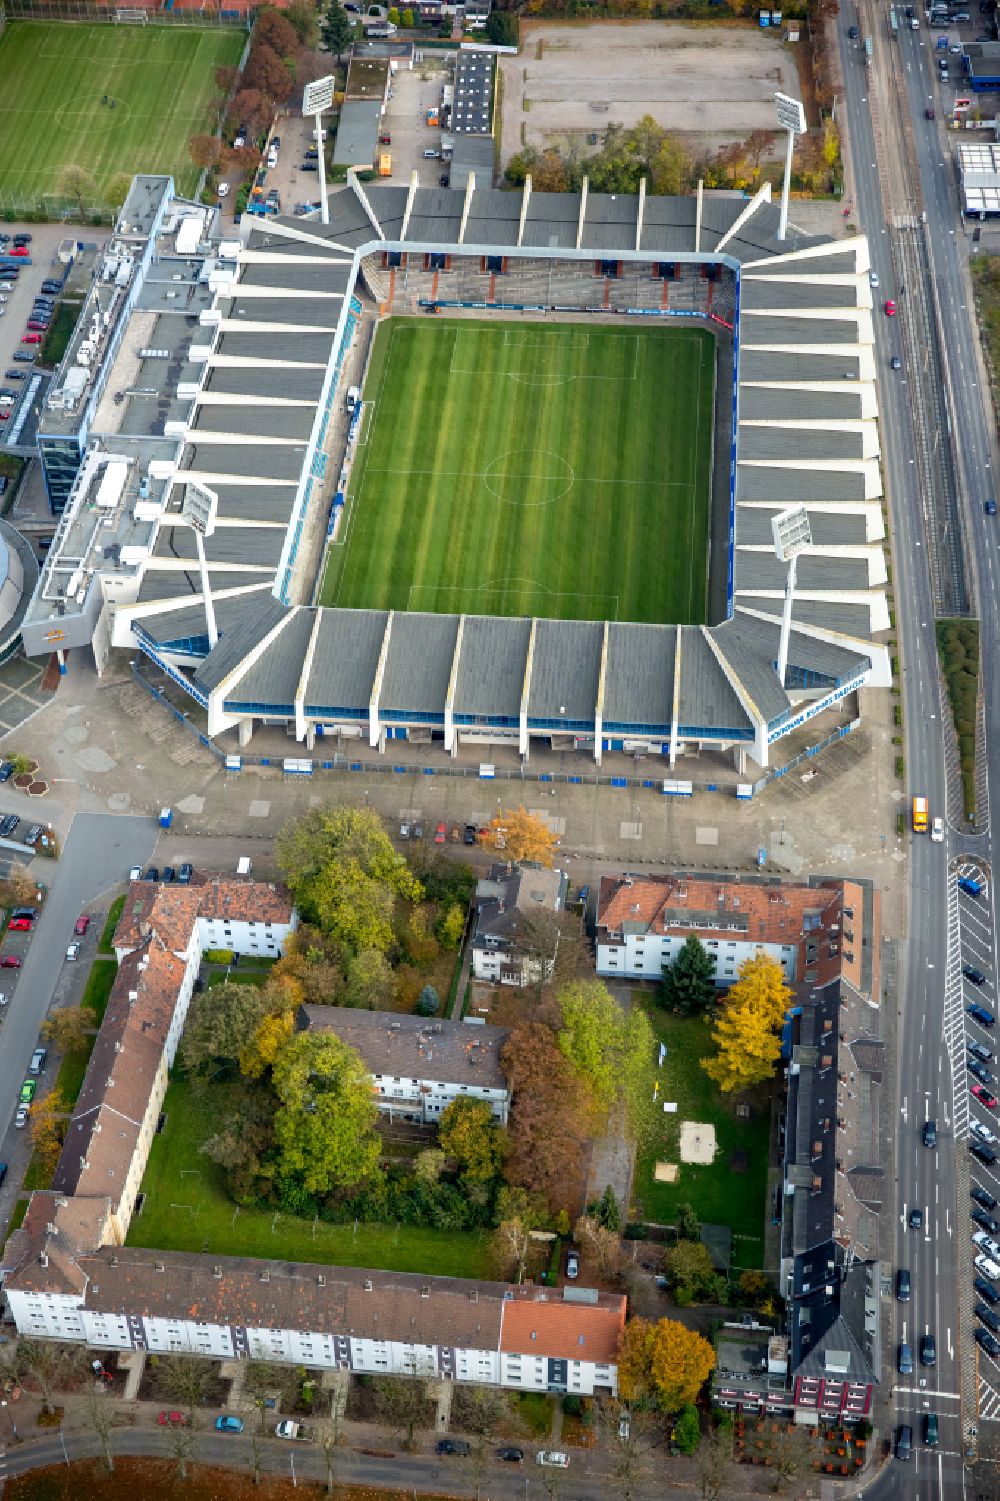 Aerial image Bochum - sports facility grounds of the stadium Vonovia Ruhrstadion formerly rewirpowerSTADION and Ruhrstadion on Castroper Strasse in Bochum in the Ruhr area in the state of North Rhine-Westphalia